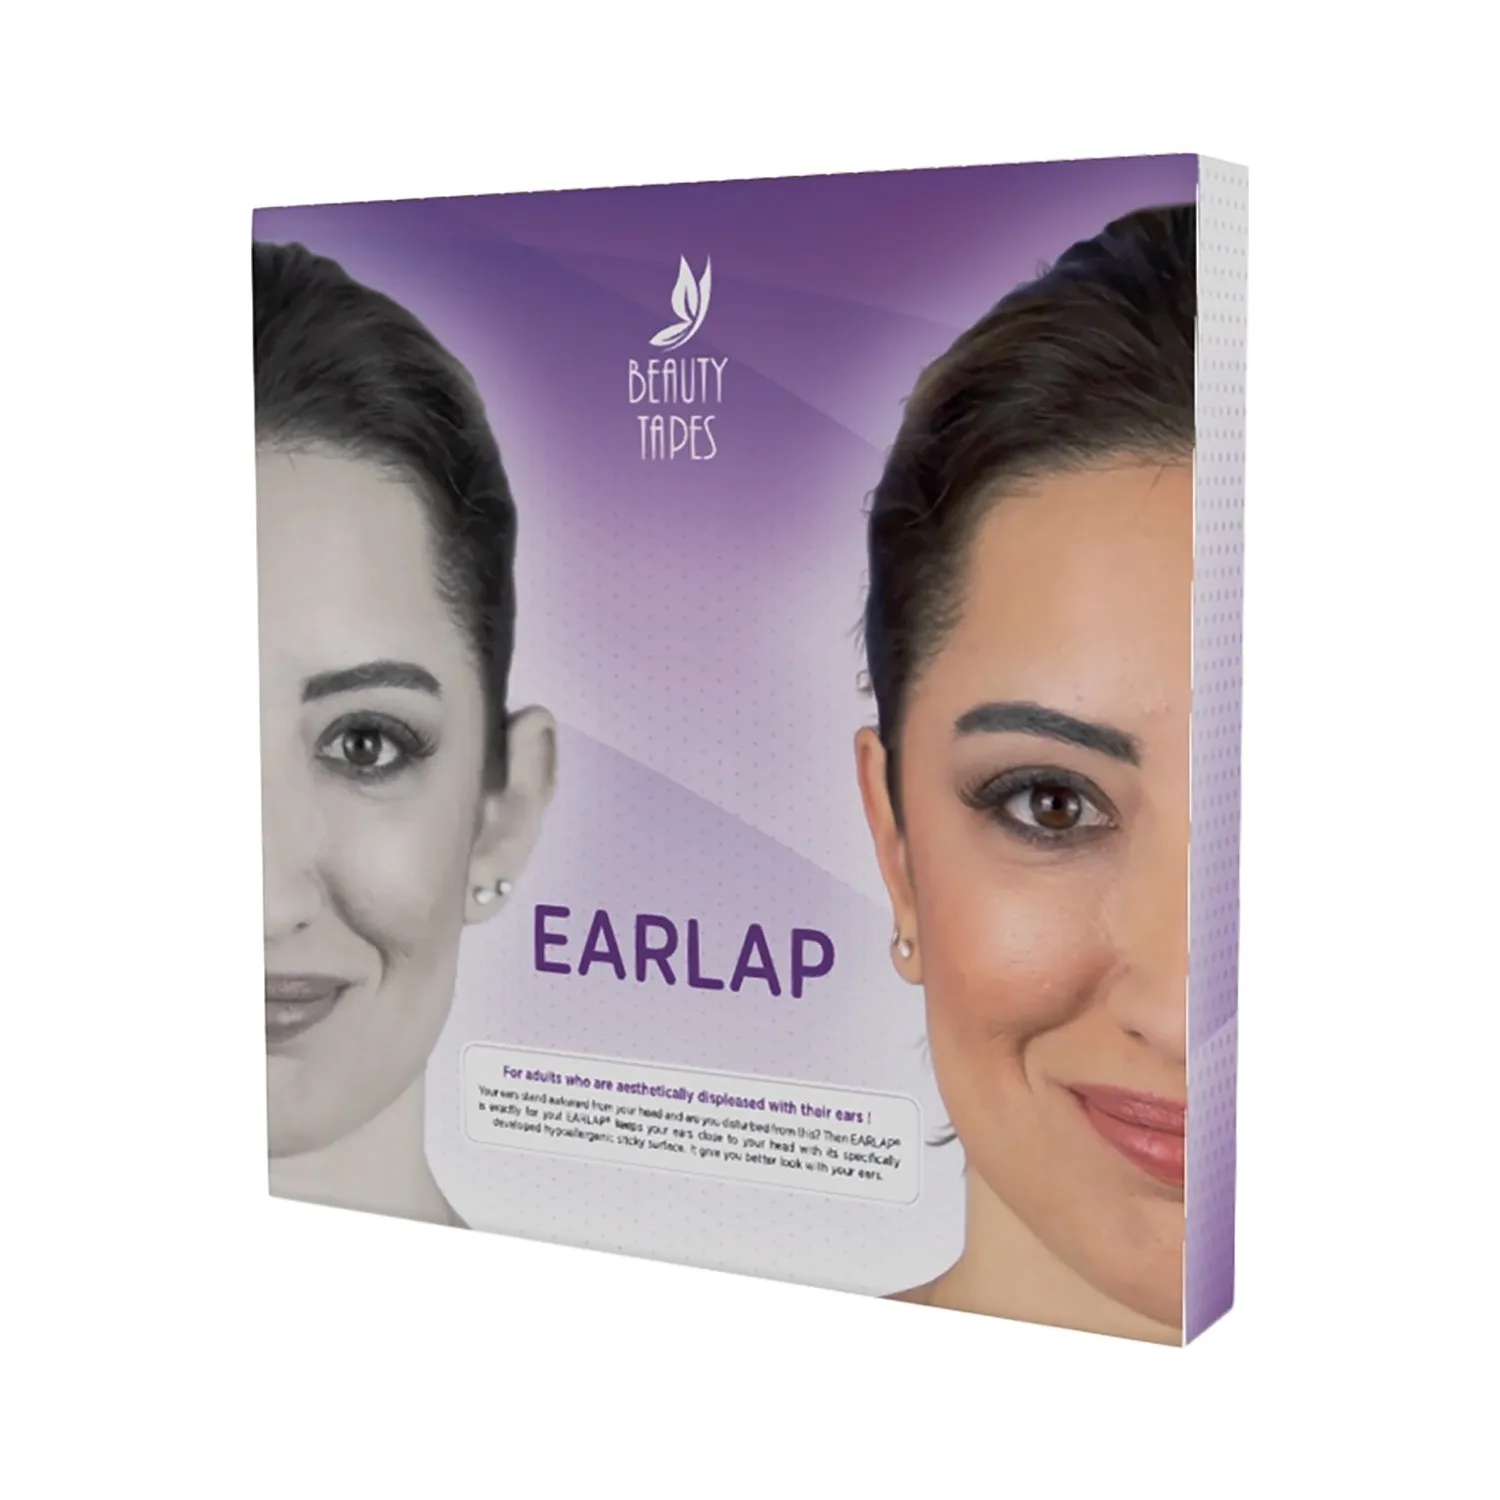 Beauty Tapes EARLAP Ear concealer Corrector Instant effect sticking system for protruding ears, ear sticking tapes